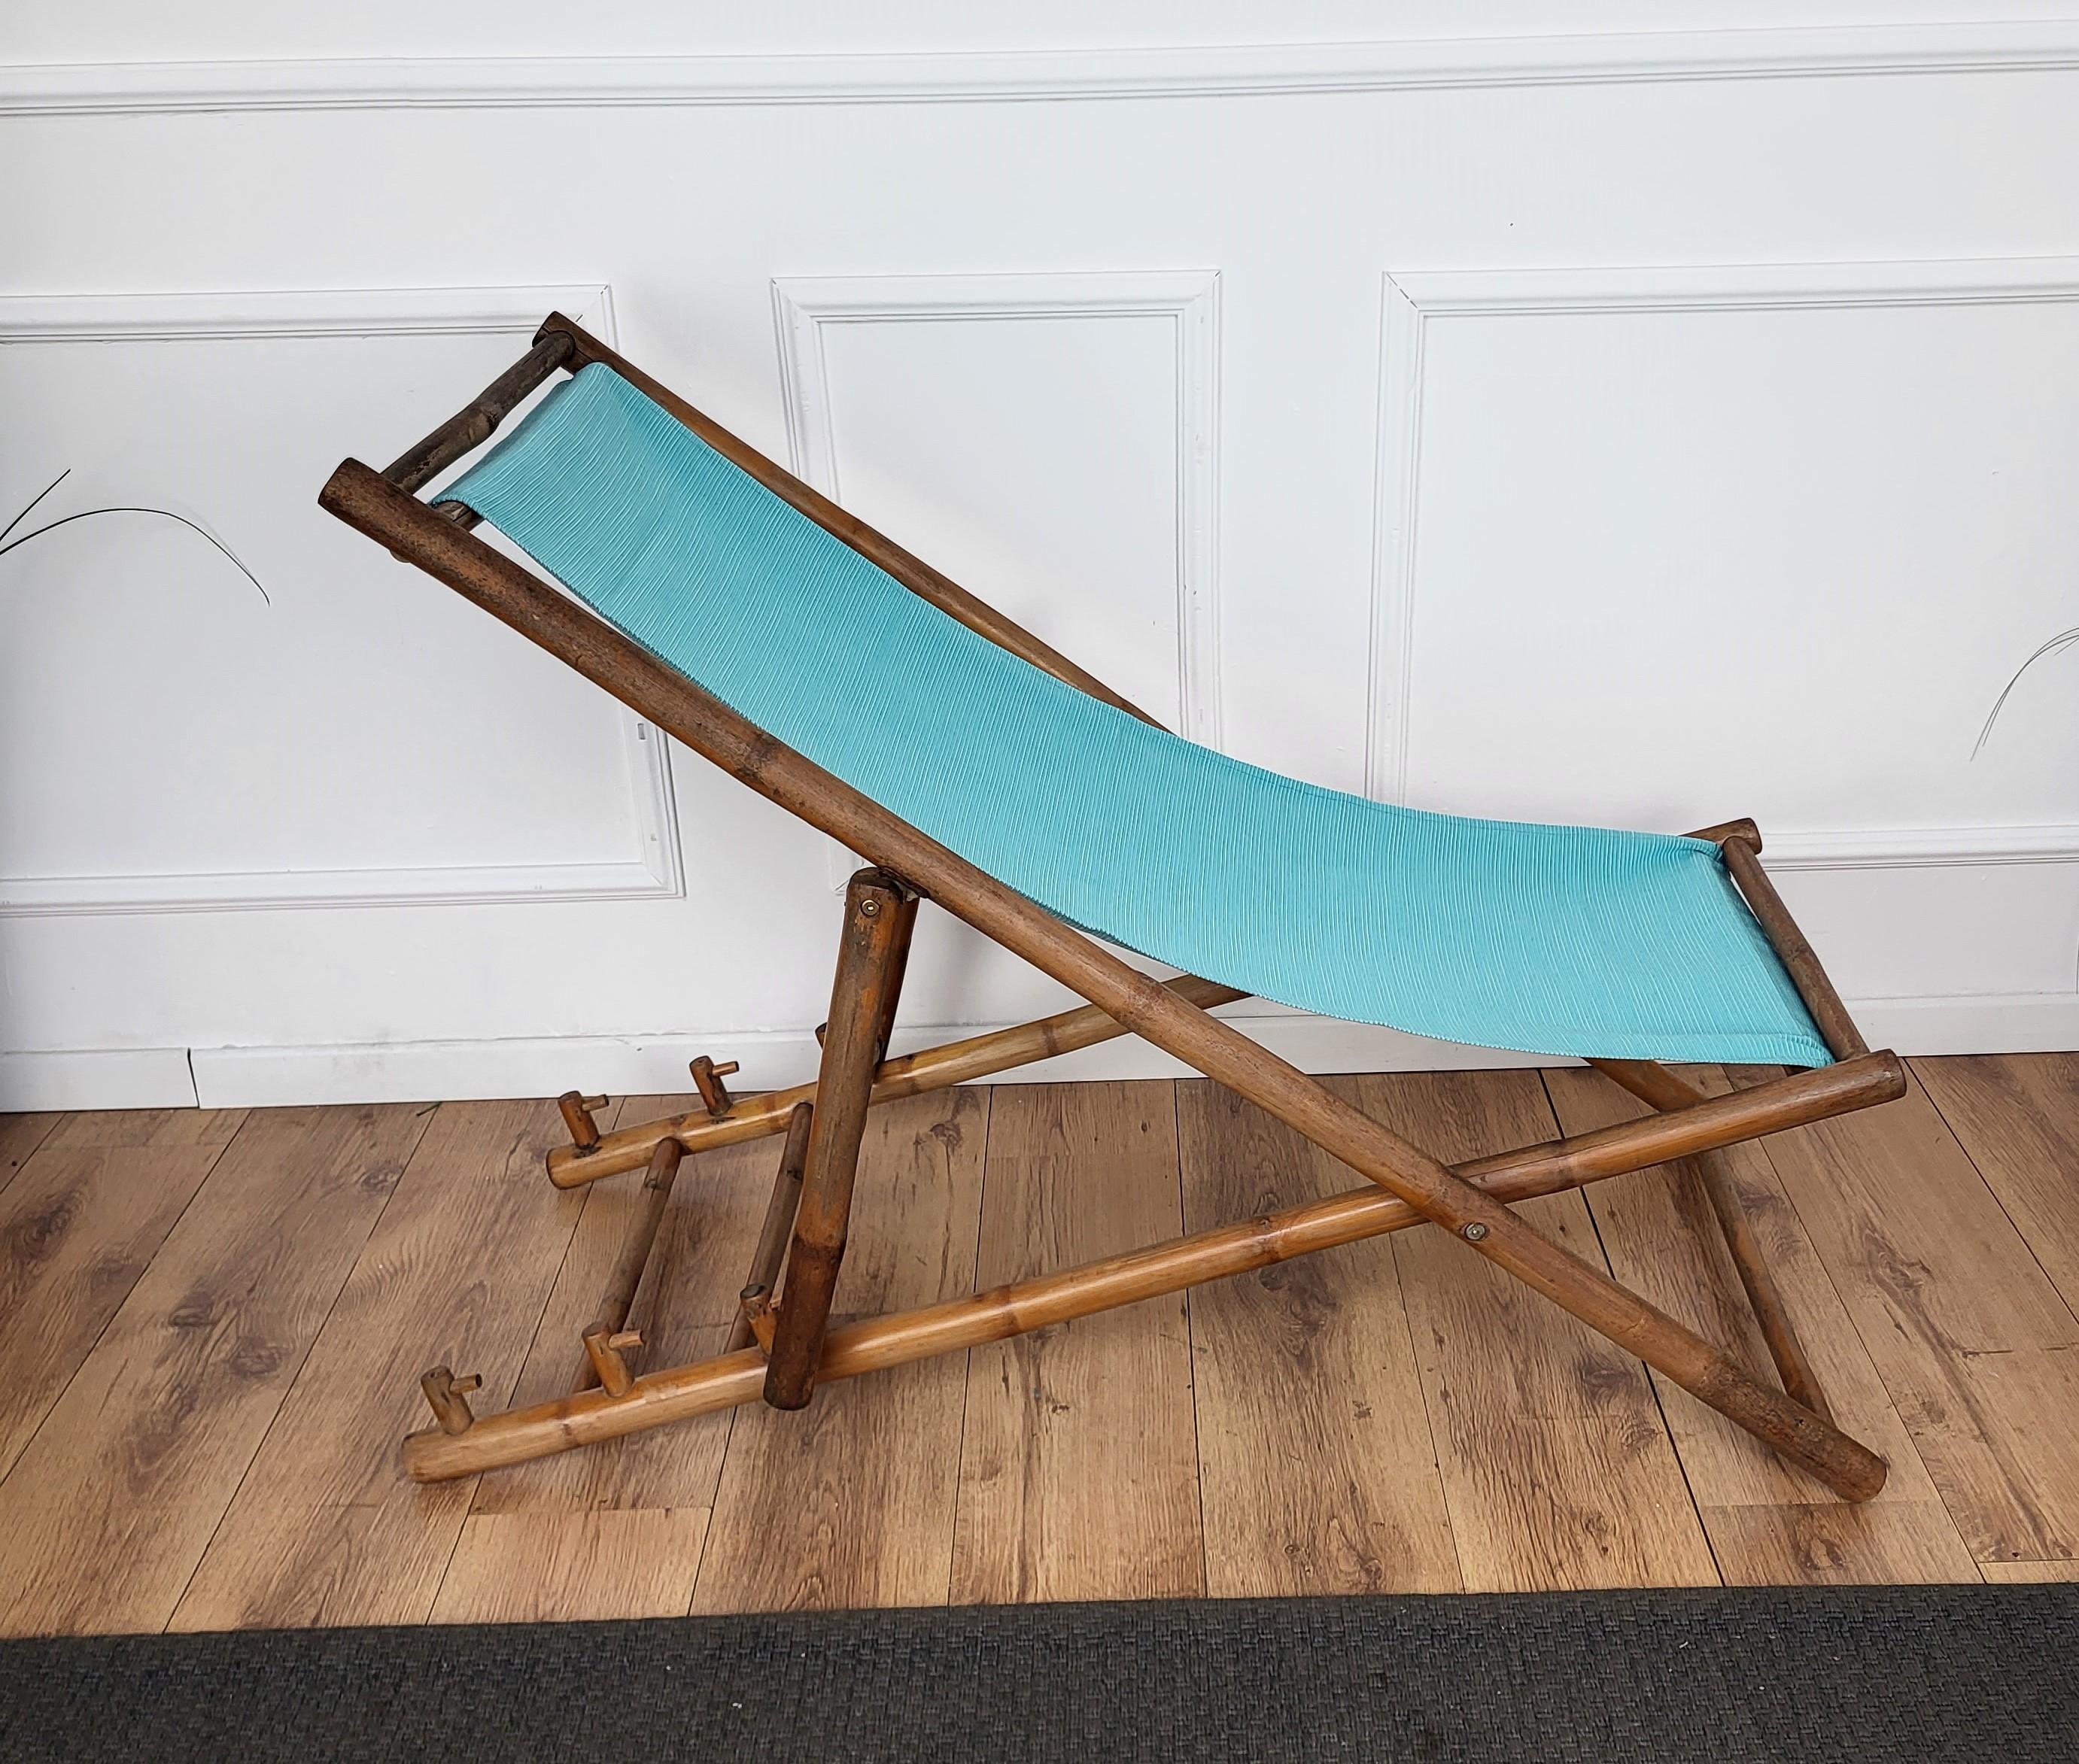 Transat Folding Deck Chair Patio Lounger, Chaise Longue, Bambo Wood and Fabric In Good Condition For Sale In Carimate, Como